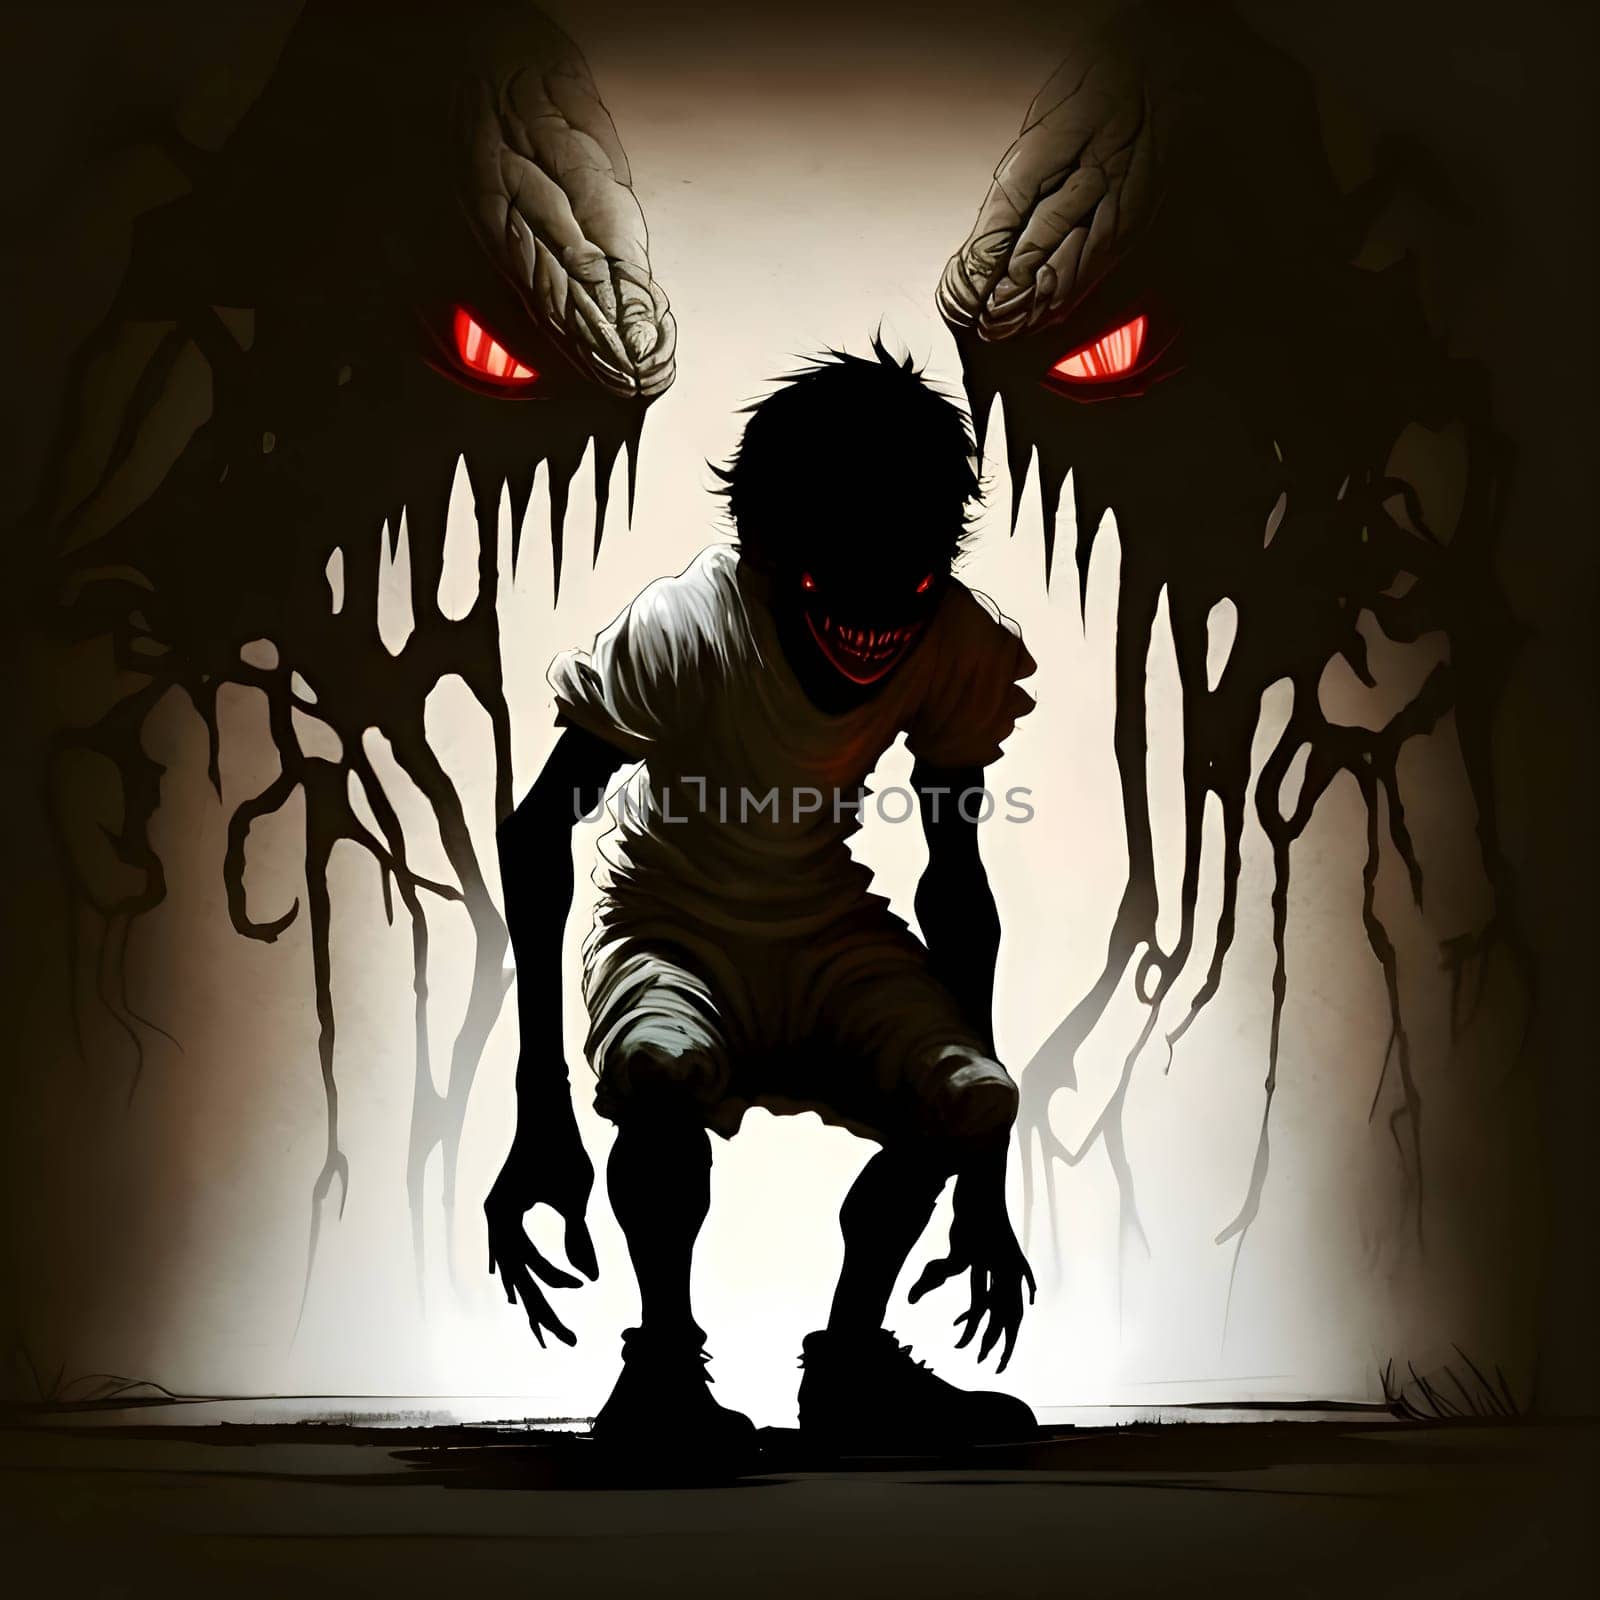 Vector illustration of a demon in black silhouette against a clean white background, capturing graceful forms.